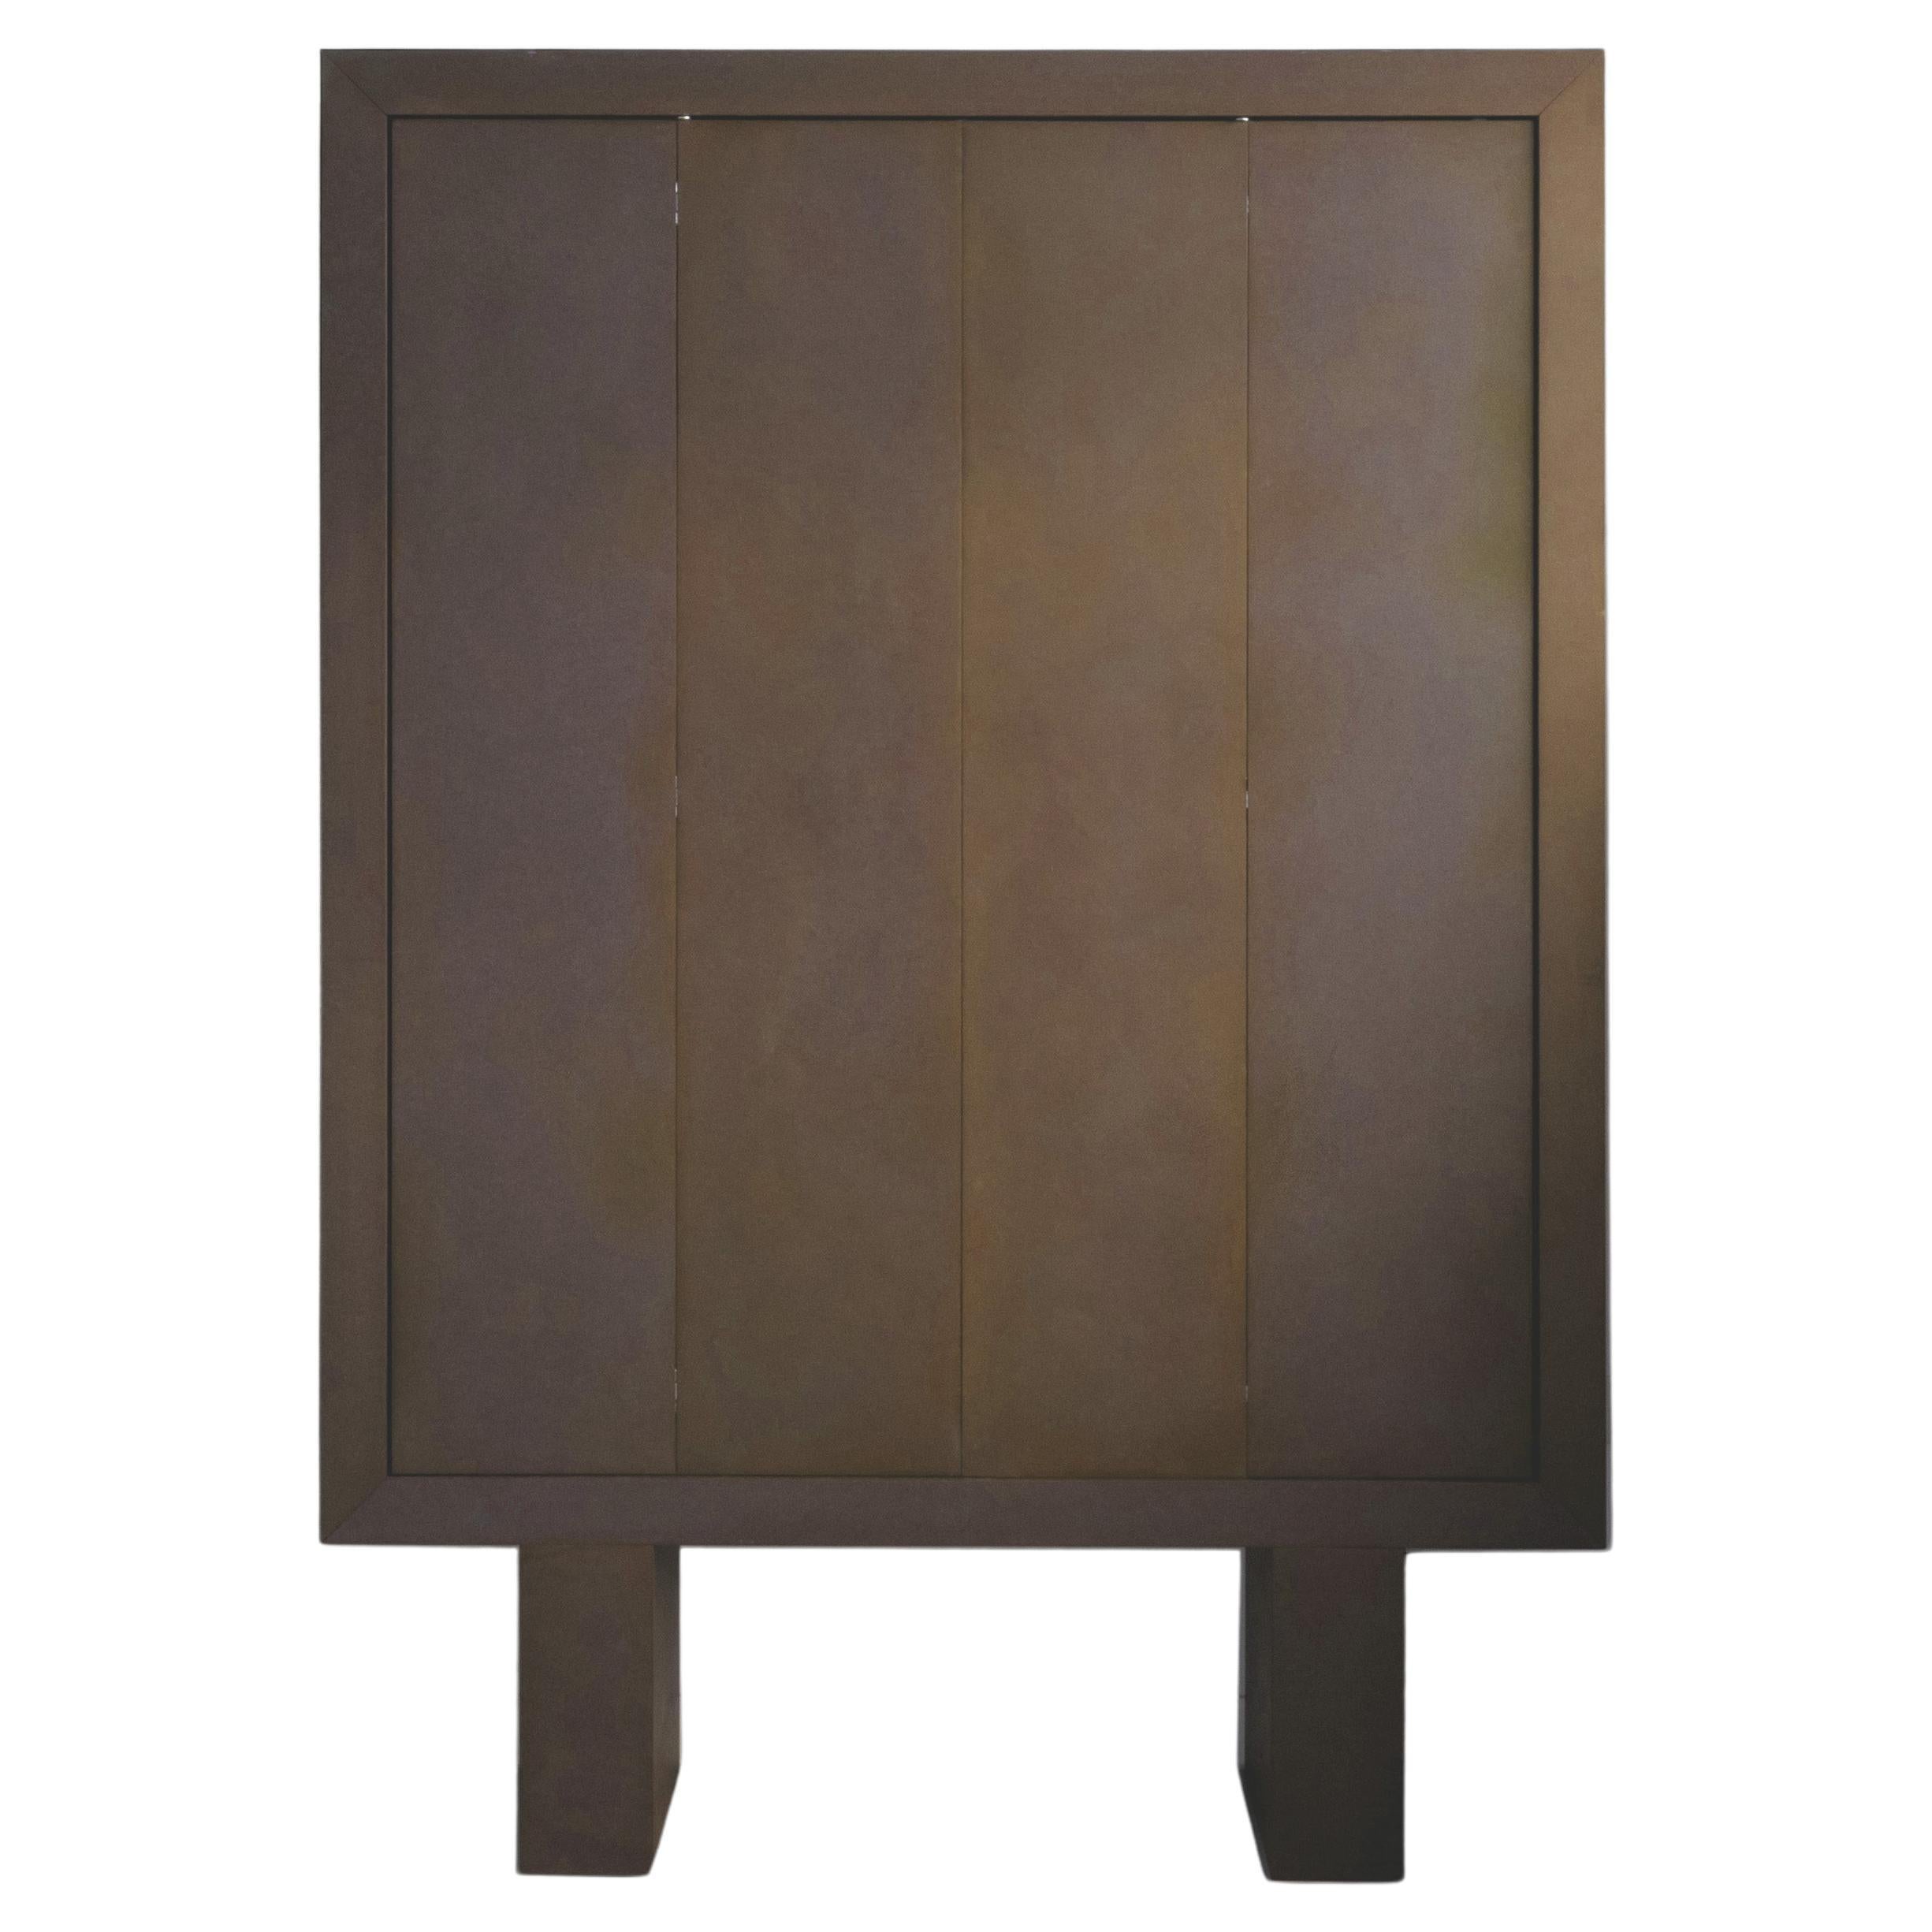 Contemporary 'Monolithic' Storage Cabinet Unit, Brown Dyed MDF